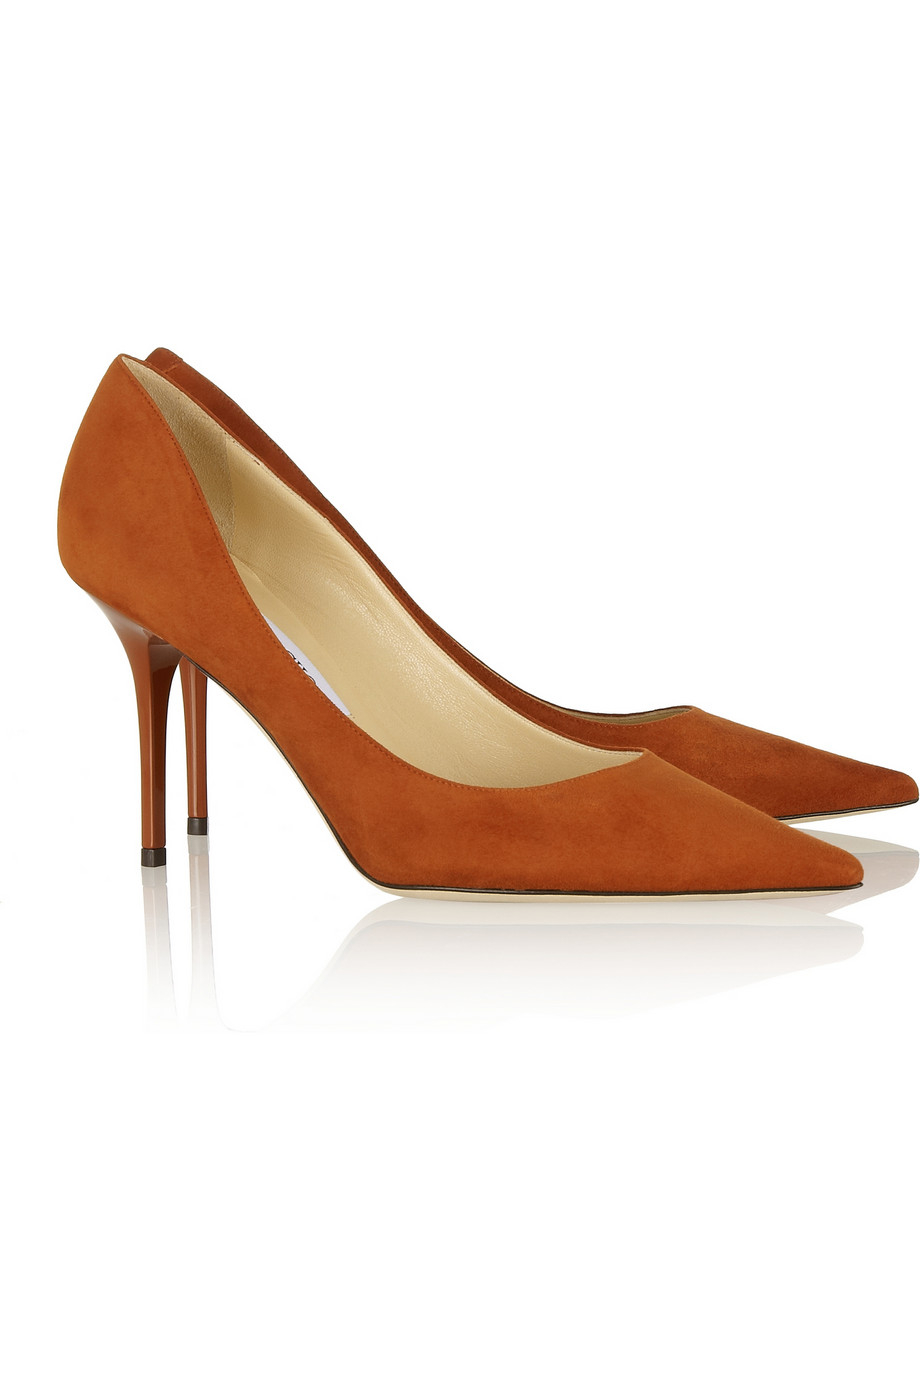 Jimmy Choo Agnes Suede Pumps in Red - Lyst